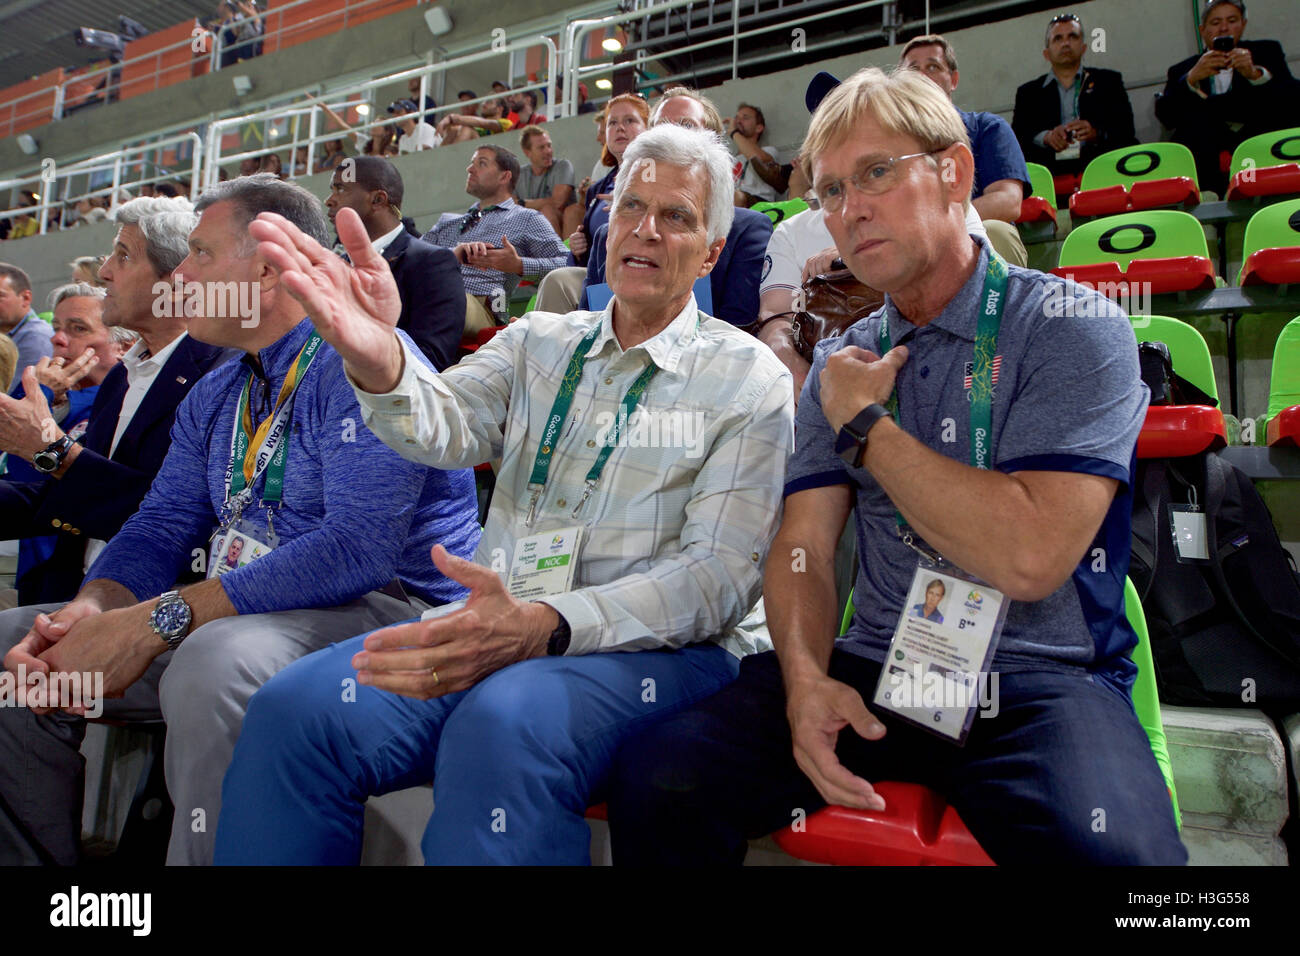 Olympic gold medal swimmer Mark Spitz speaks with Olympic gymnast Bart Conner during a preliminary round of men's gymnastics at Olympic Park in Rio de Janiero, Brazil, on August 6, 2016, as U.S. Secretary of State John Kerry and his fellow members of the U.S. Presidential Delegation attend the Summer Olympics. Stock Photo